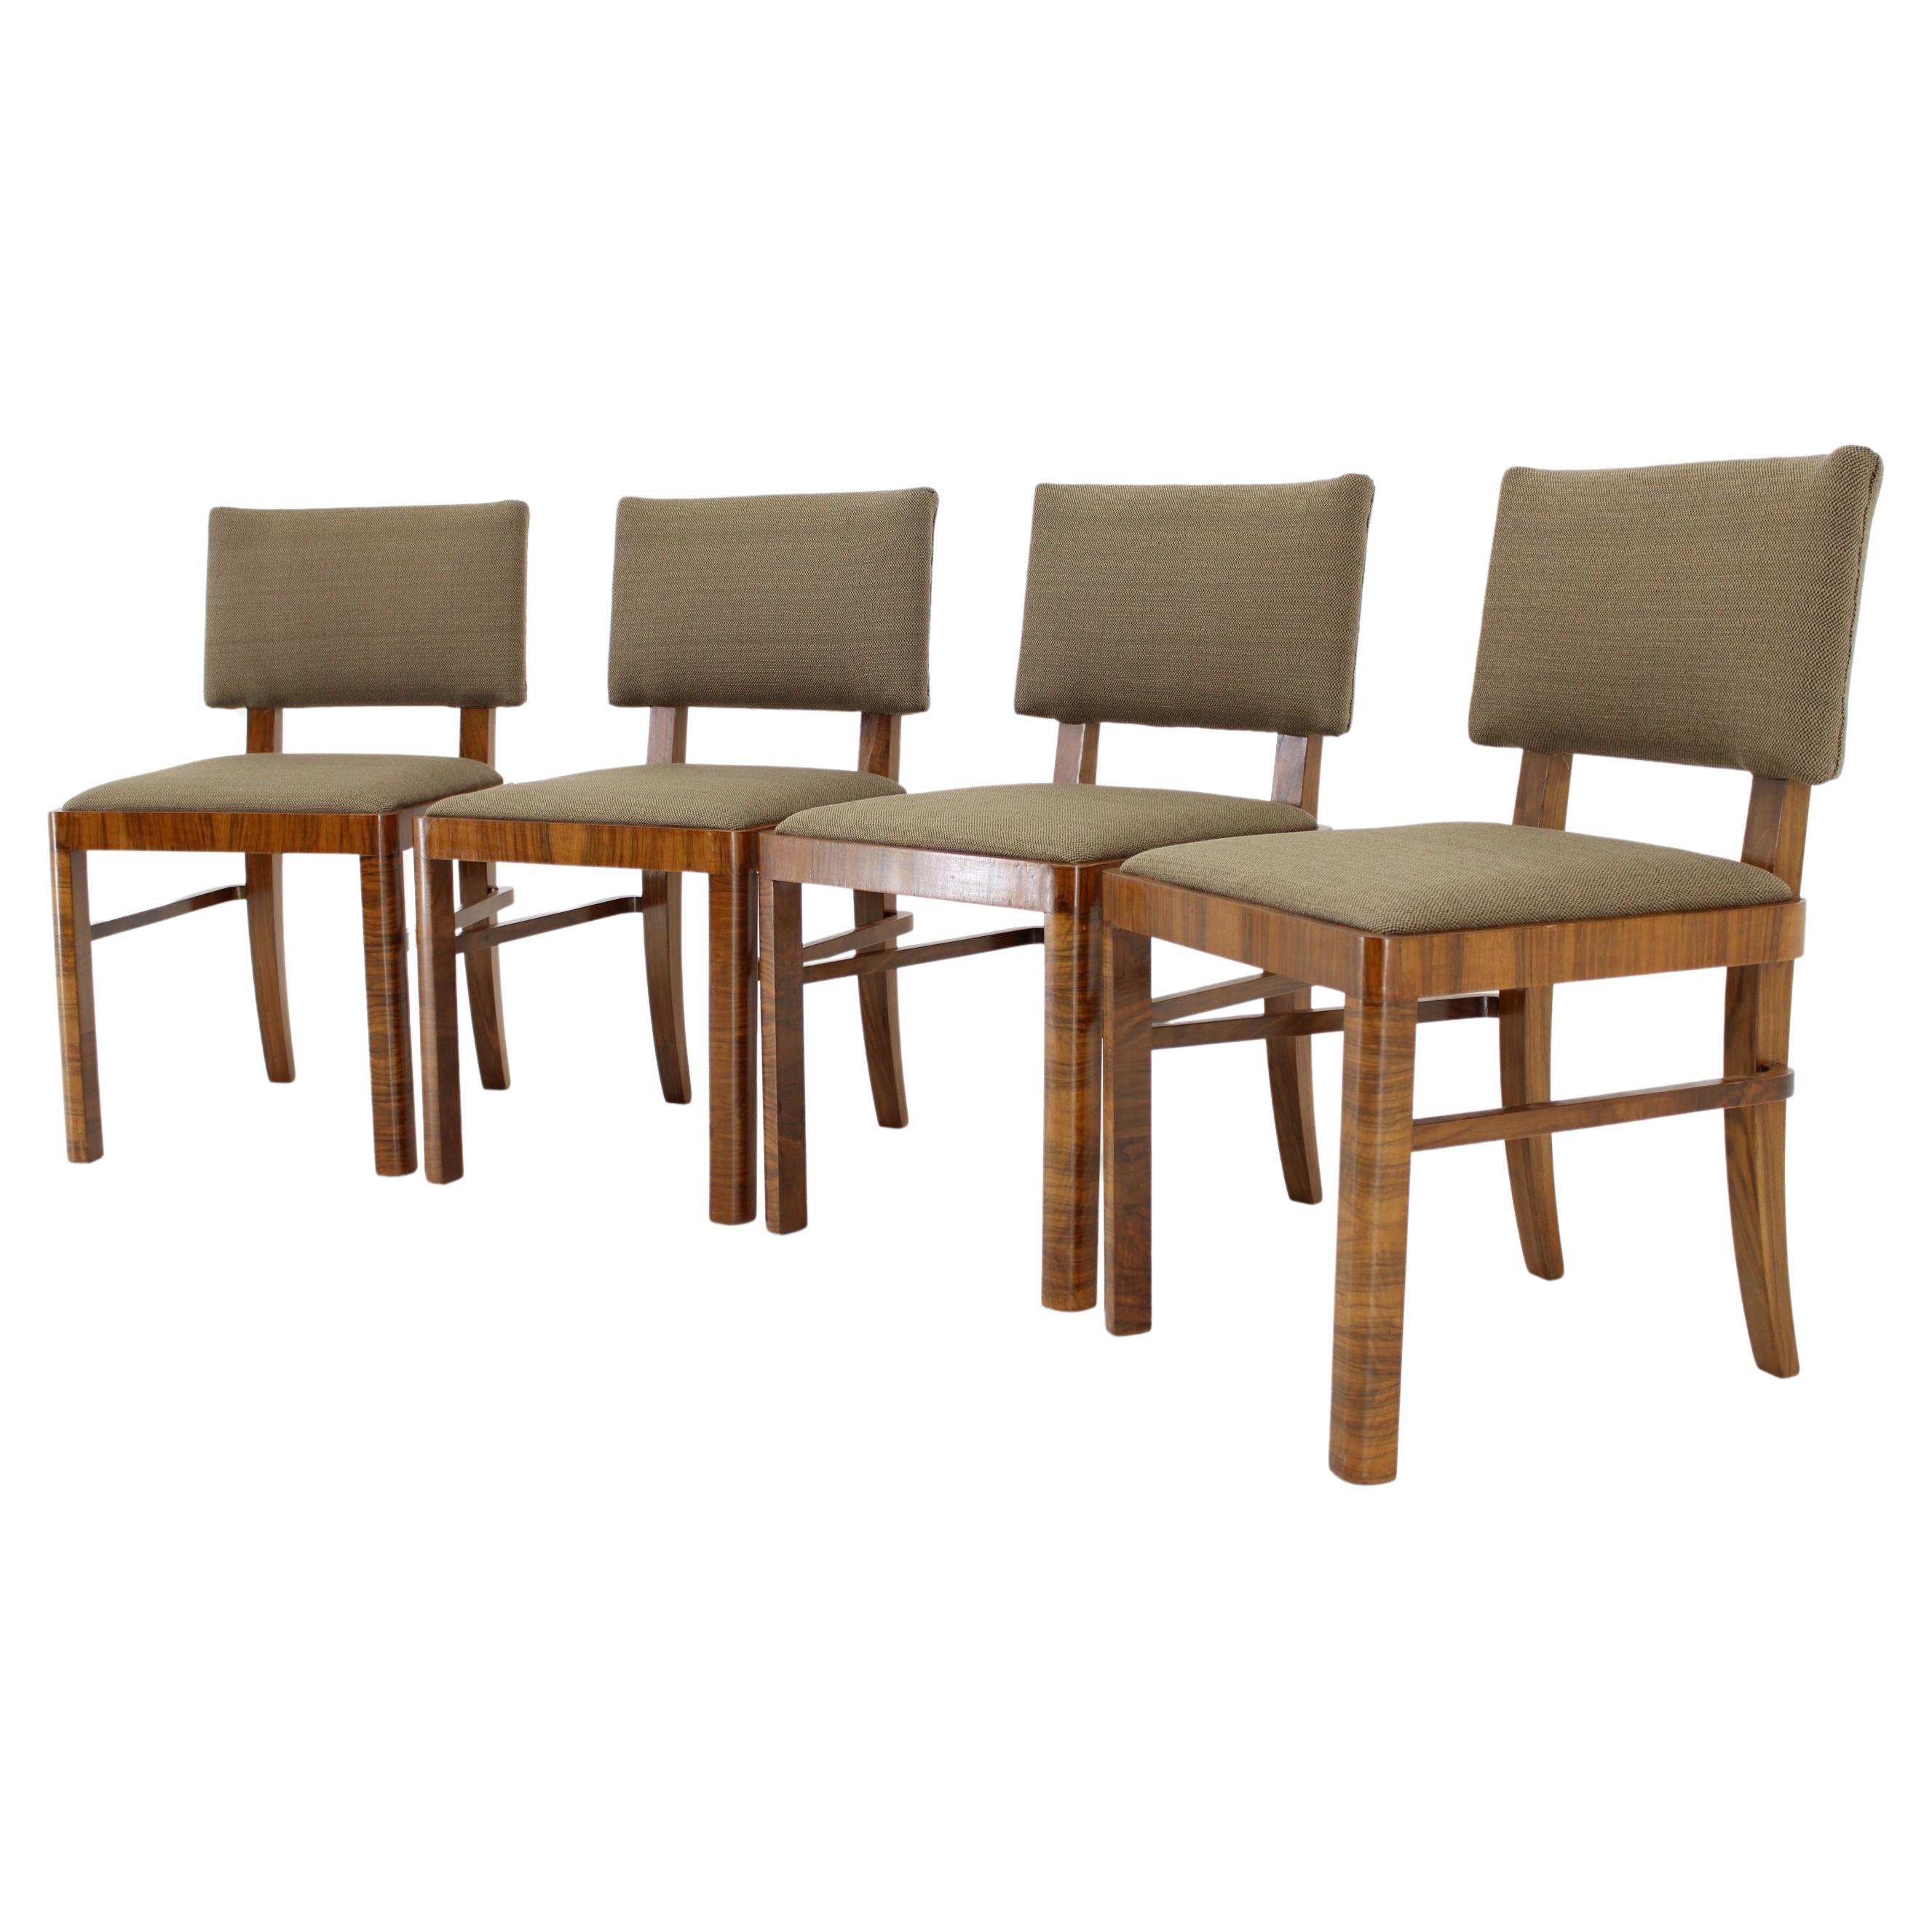 1930s Set of Four Restored Art Deco Dininng Chairs, Czechoslovakia